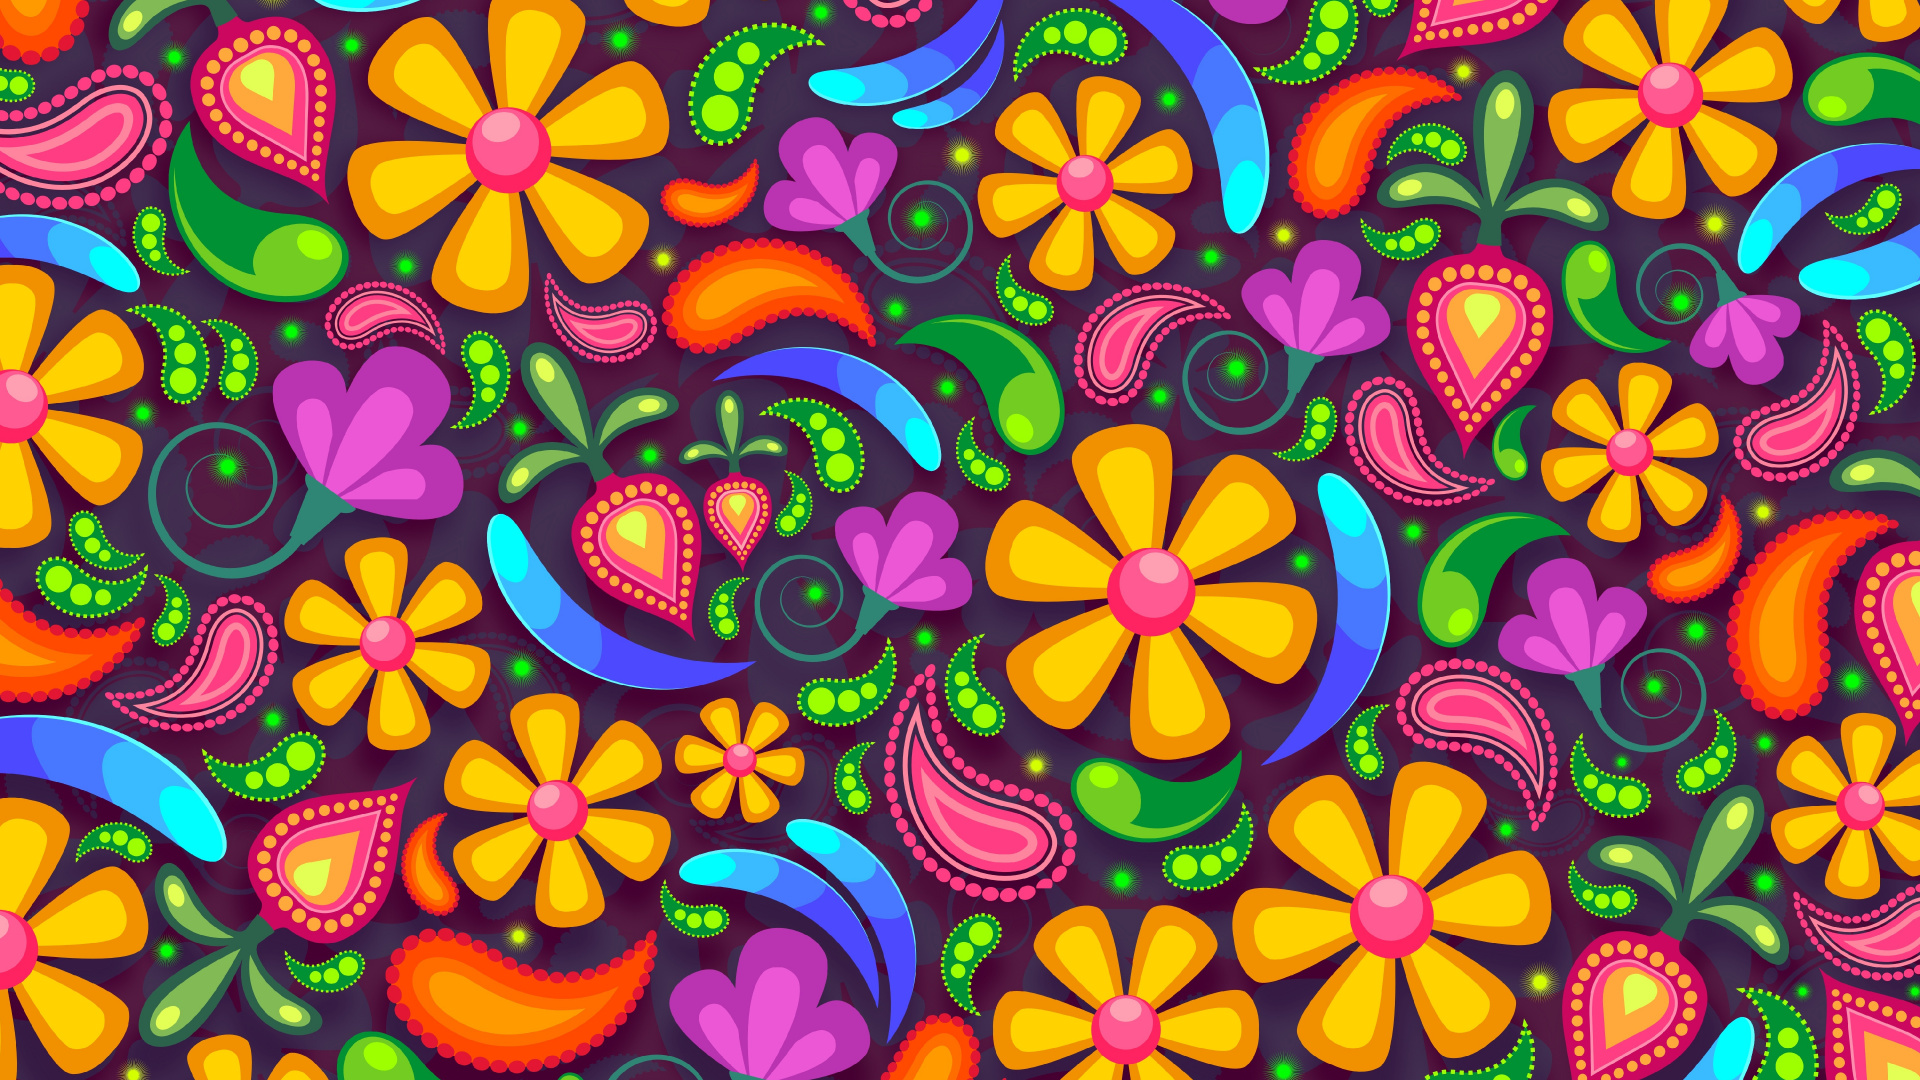 Red Green and Yellow Floral Illustration. Wallpaper in 1920x1080 Resolution